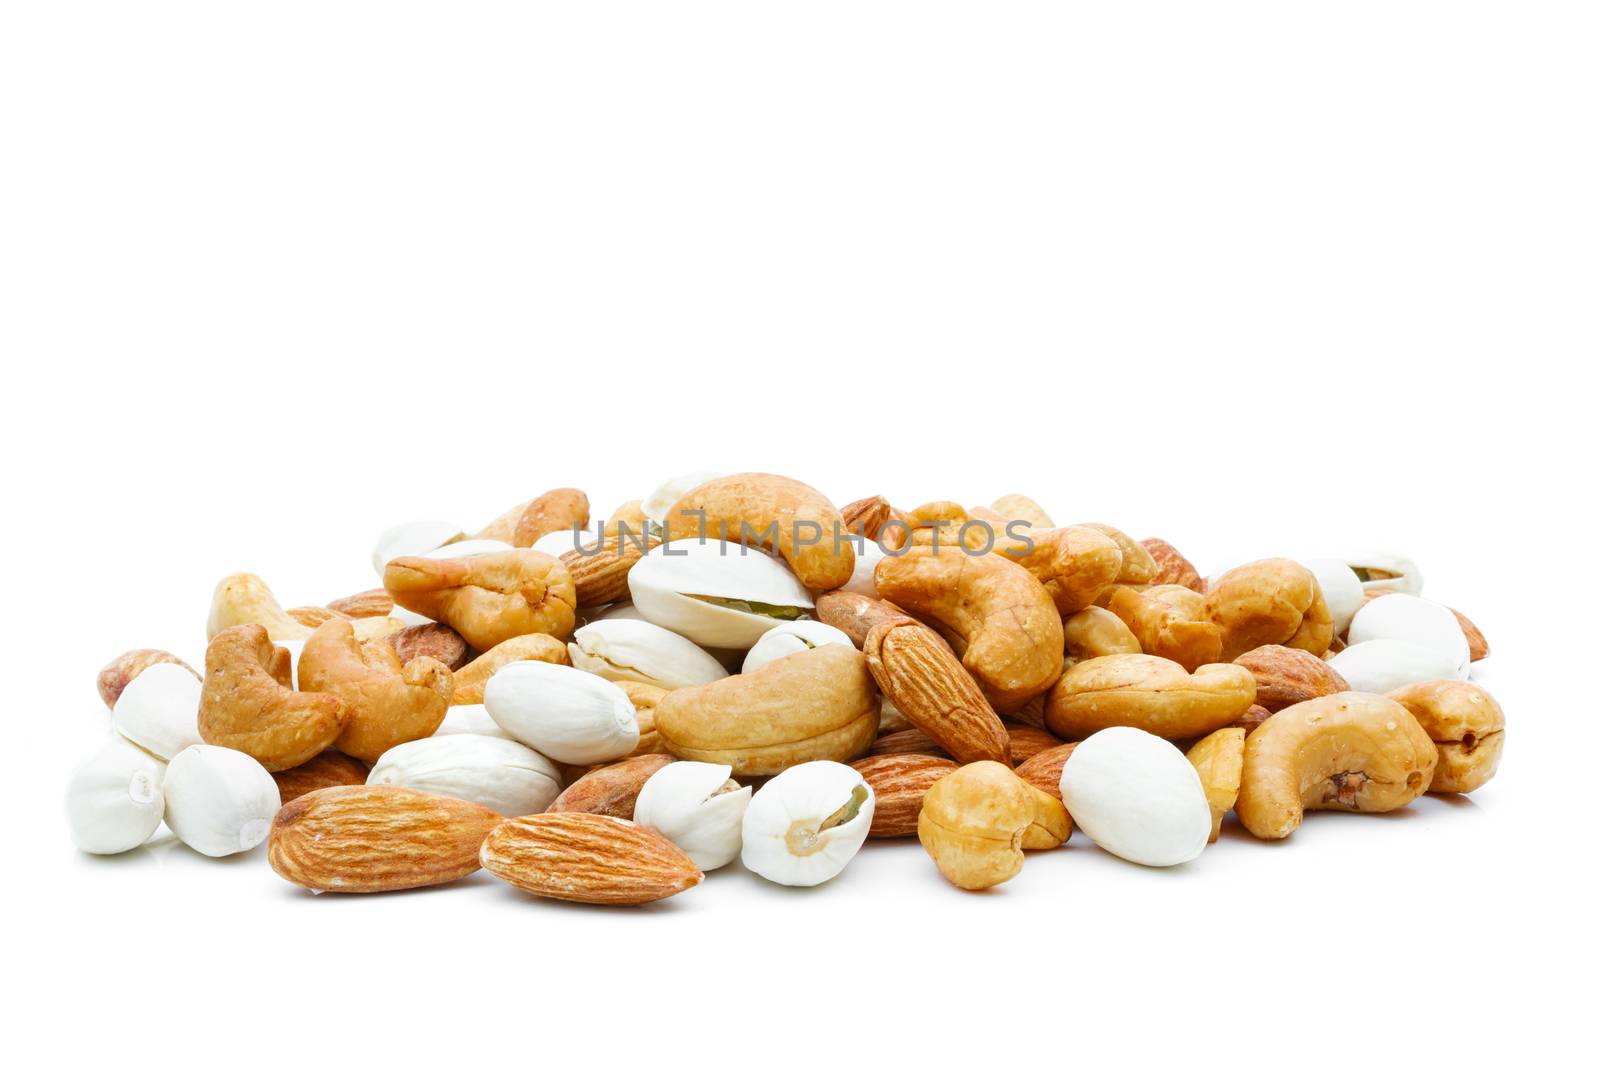 Almonds Pistachio and  Cashews in a sack on a white background by sompongtom